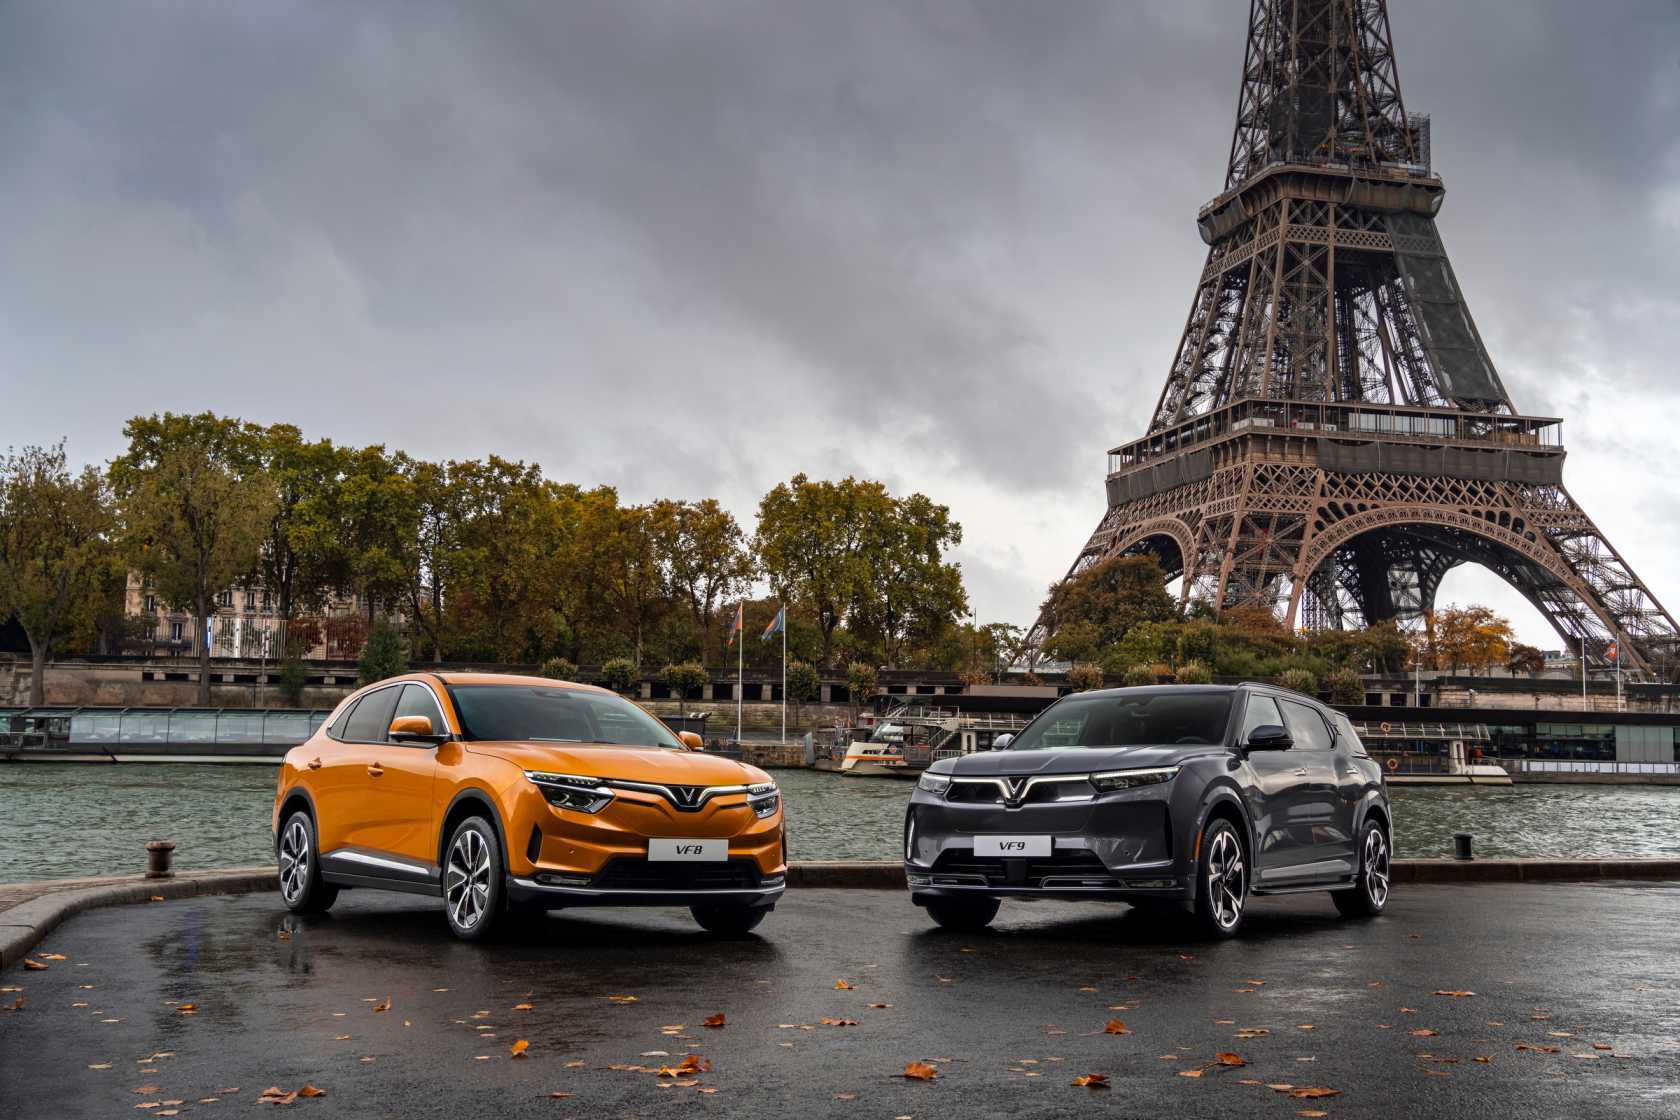 An orange and black Vinfast VF9 parked in front of the Eiffel Tower in Paris. 